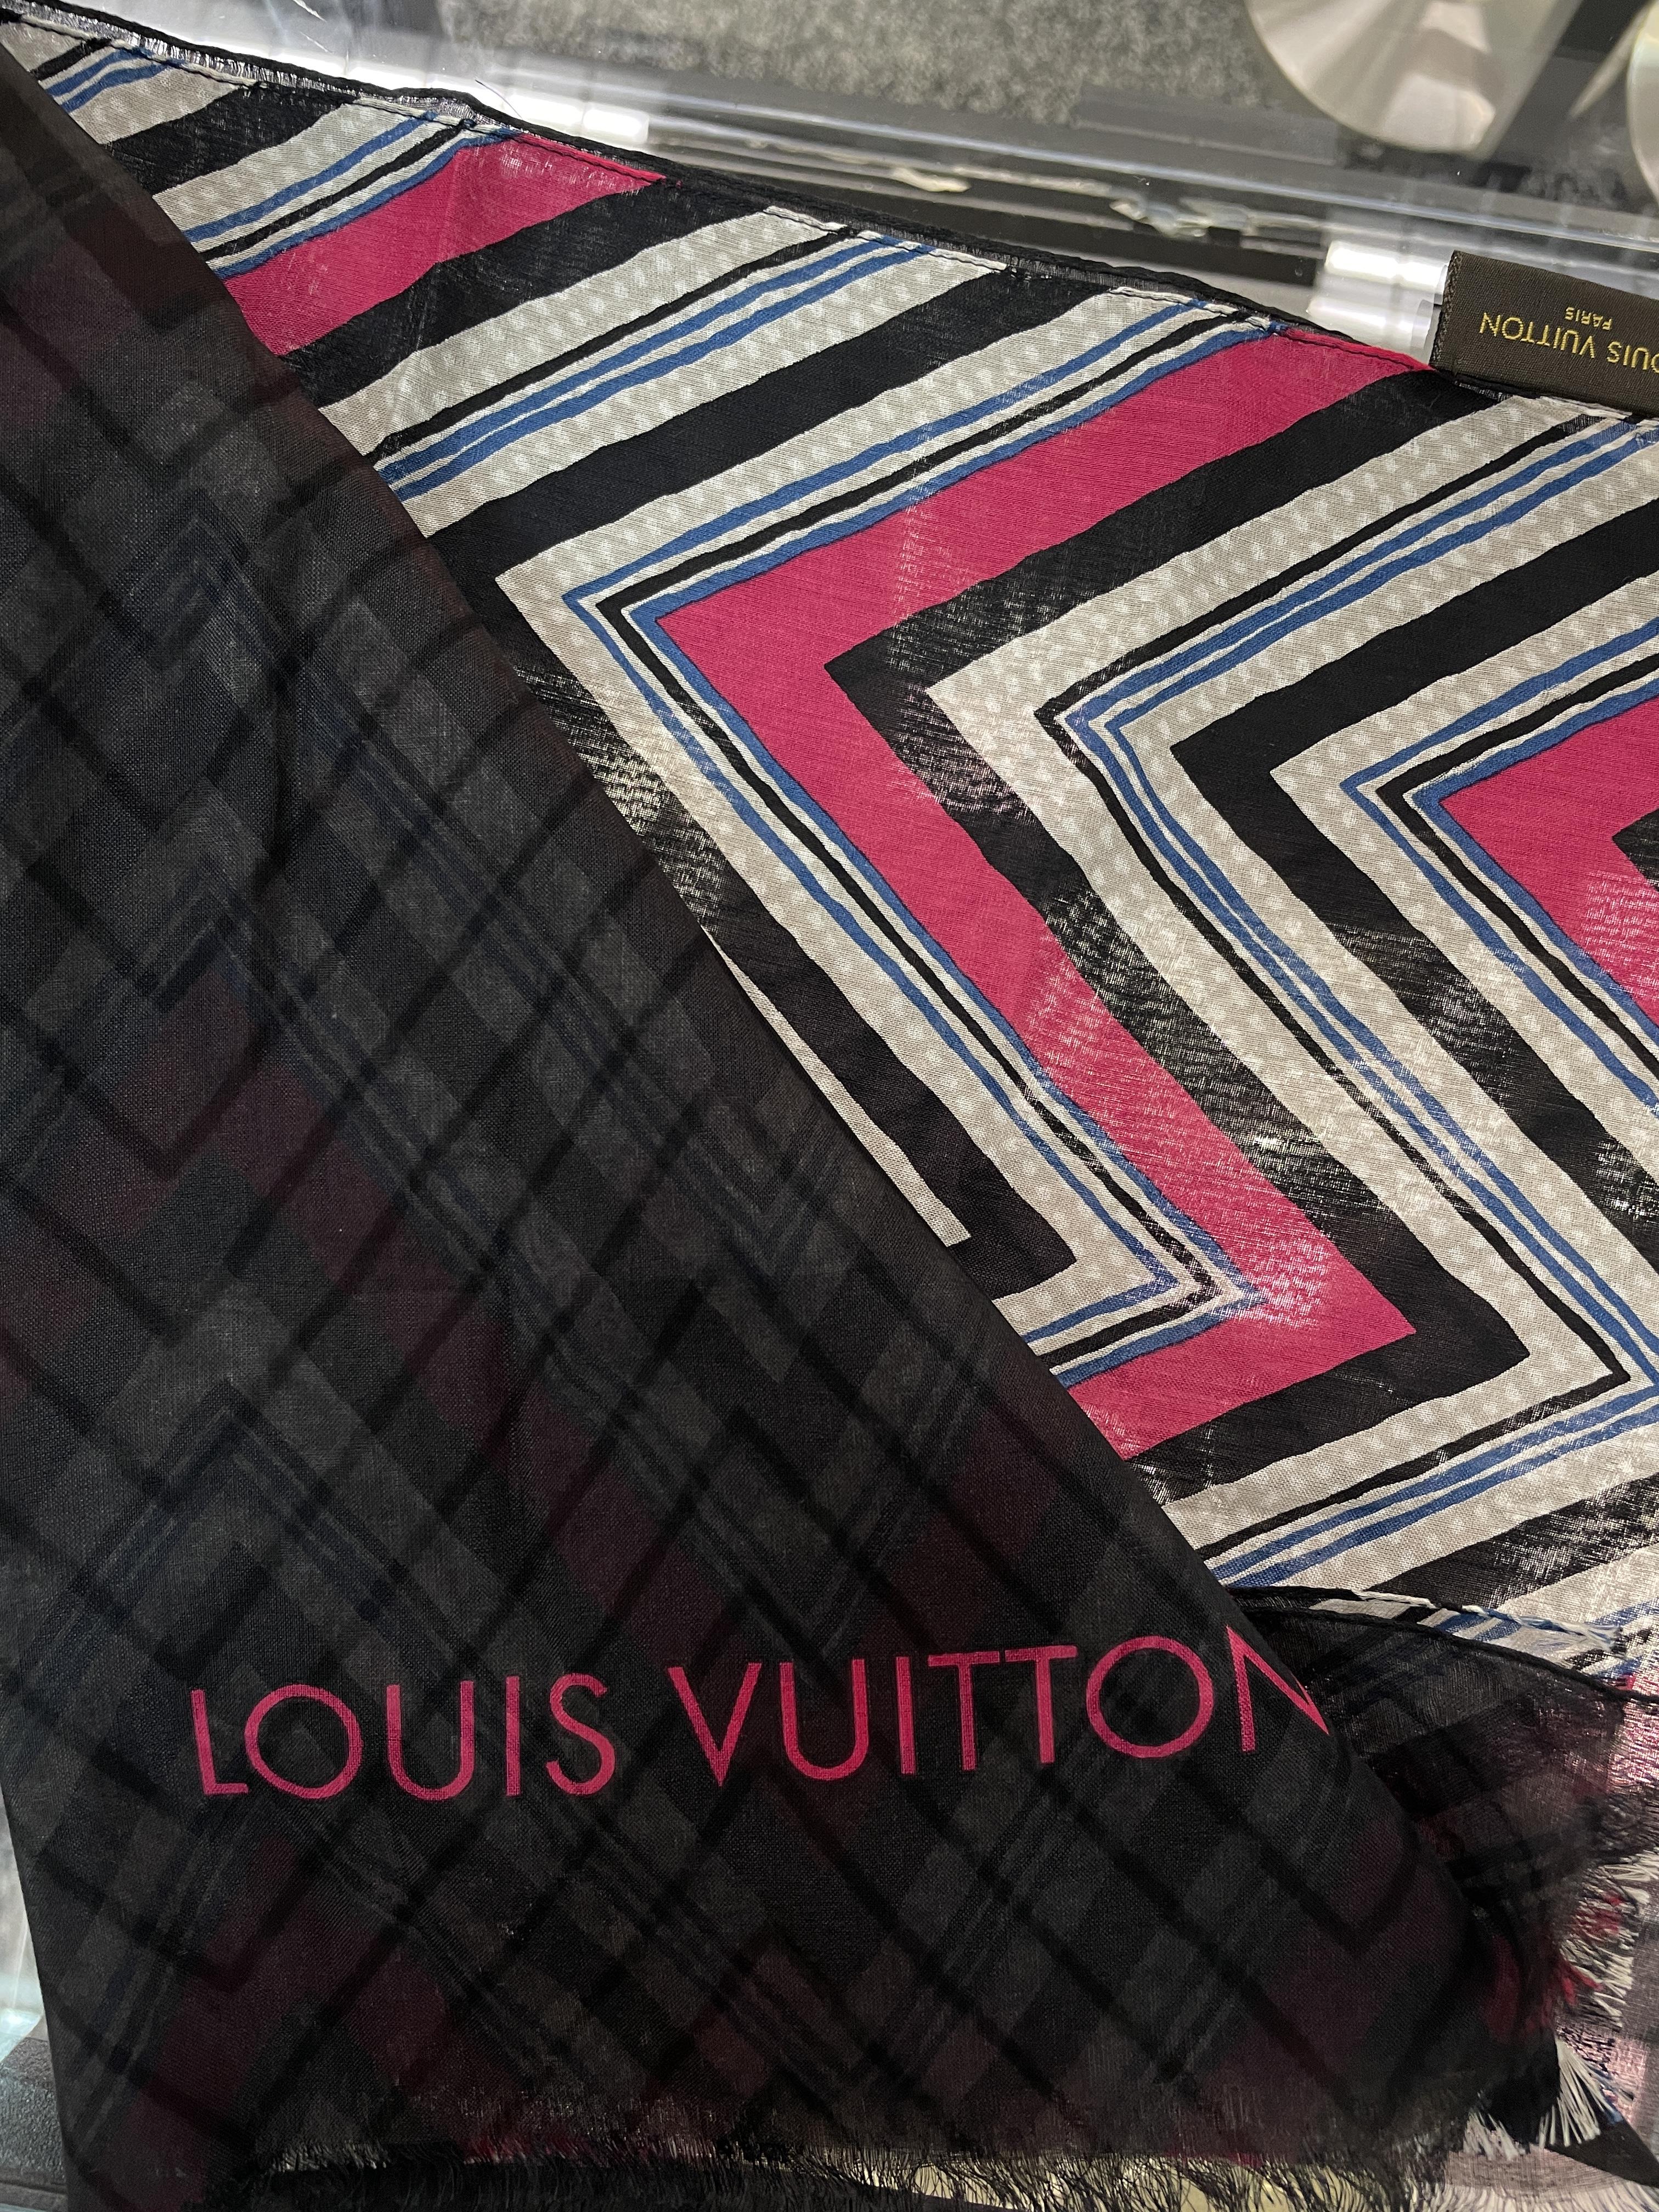 AN ASSORTMENT OF LOUIS VUITTON SCARVES - Image 14 of 14